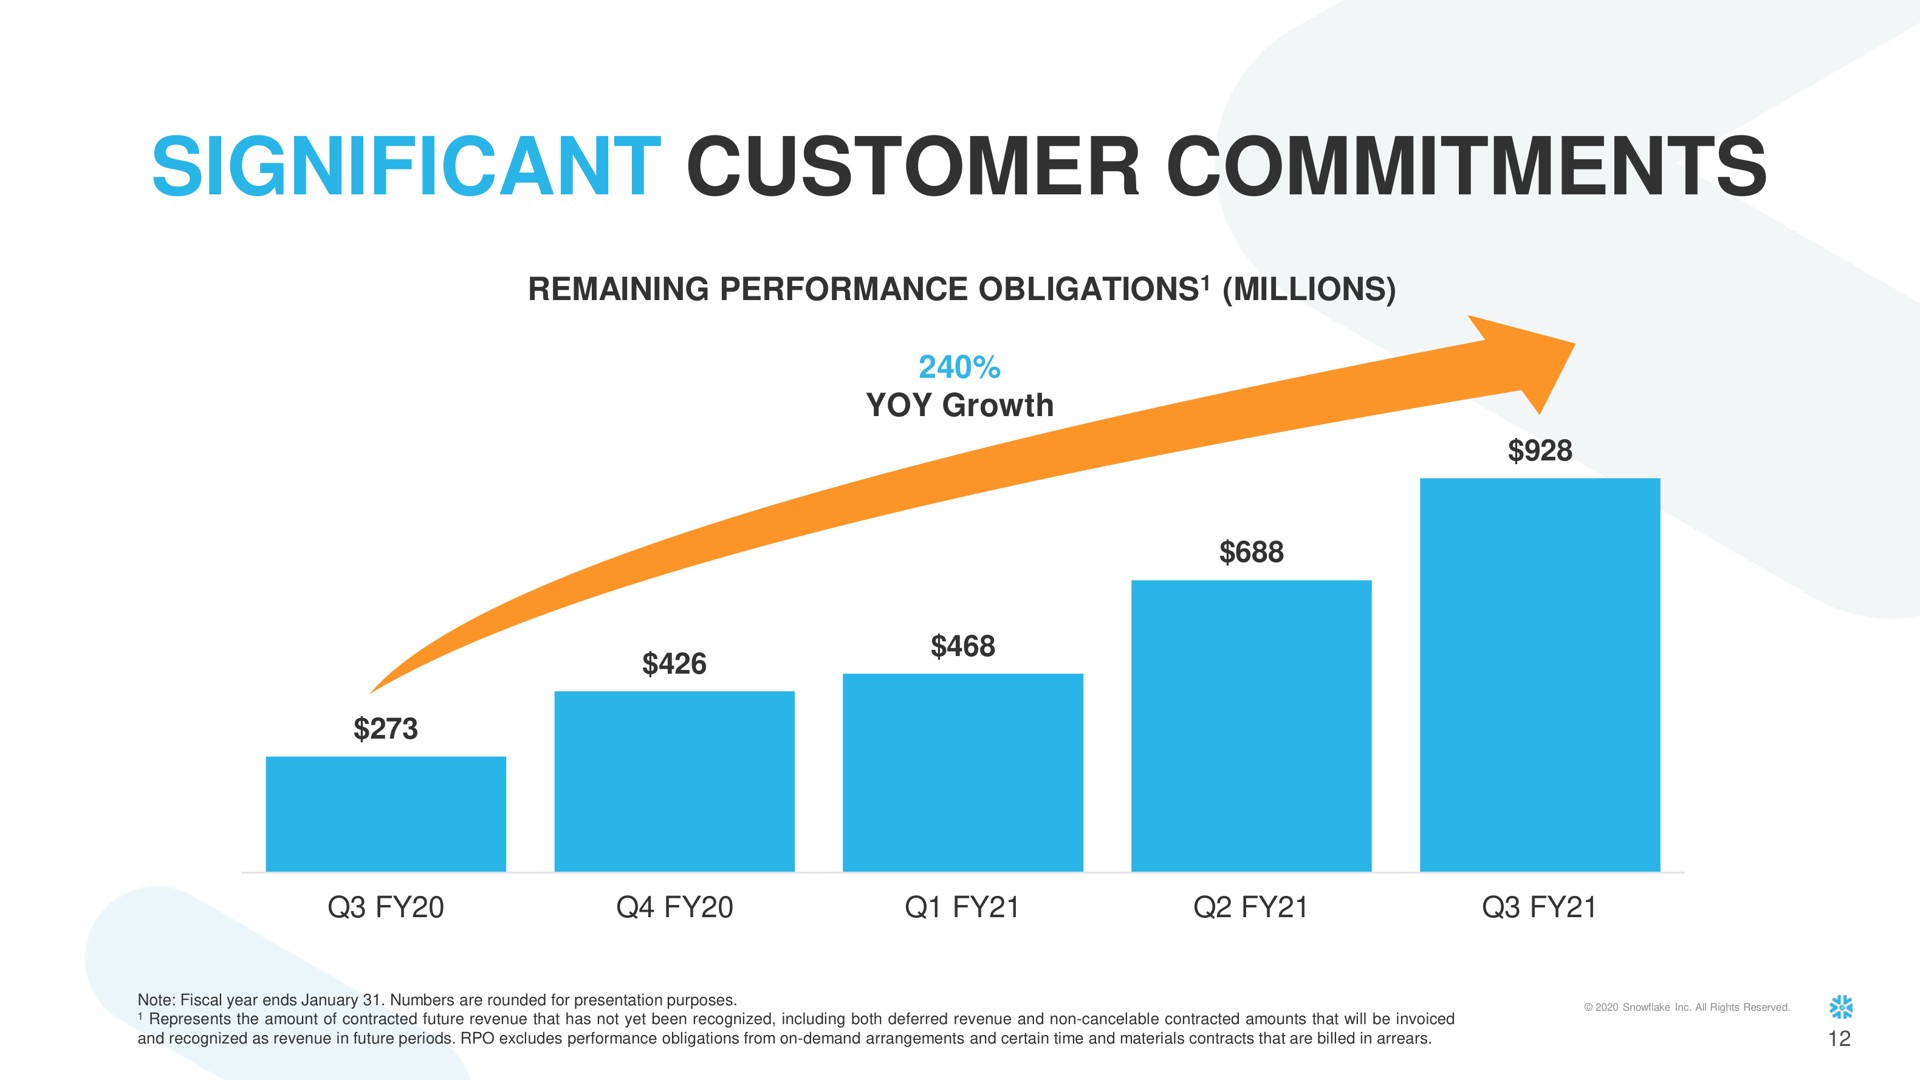 significant customer commitments | Snowflake